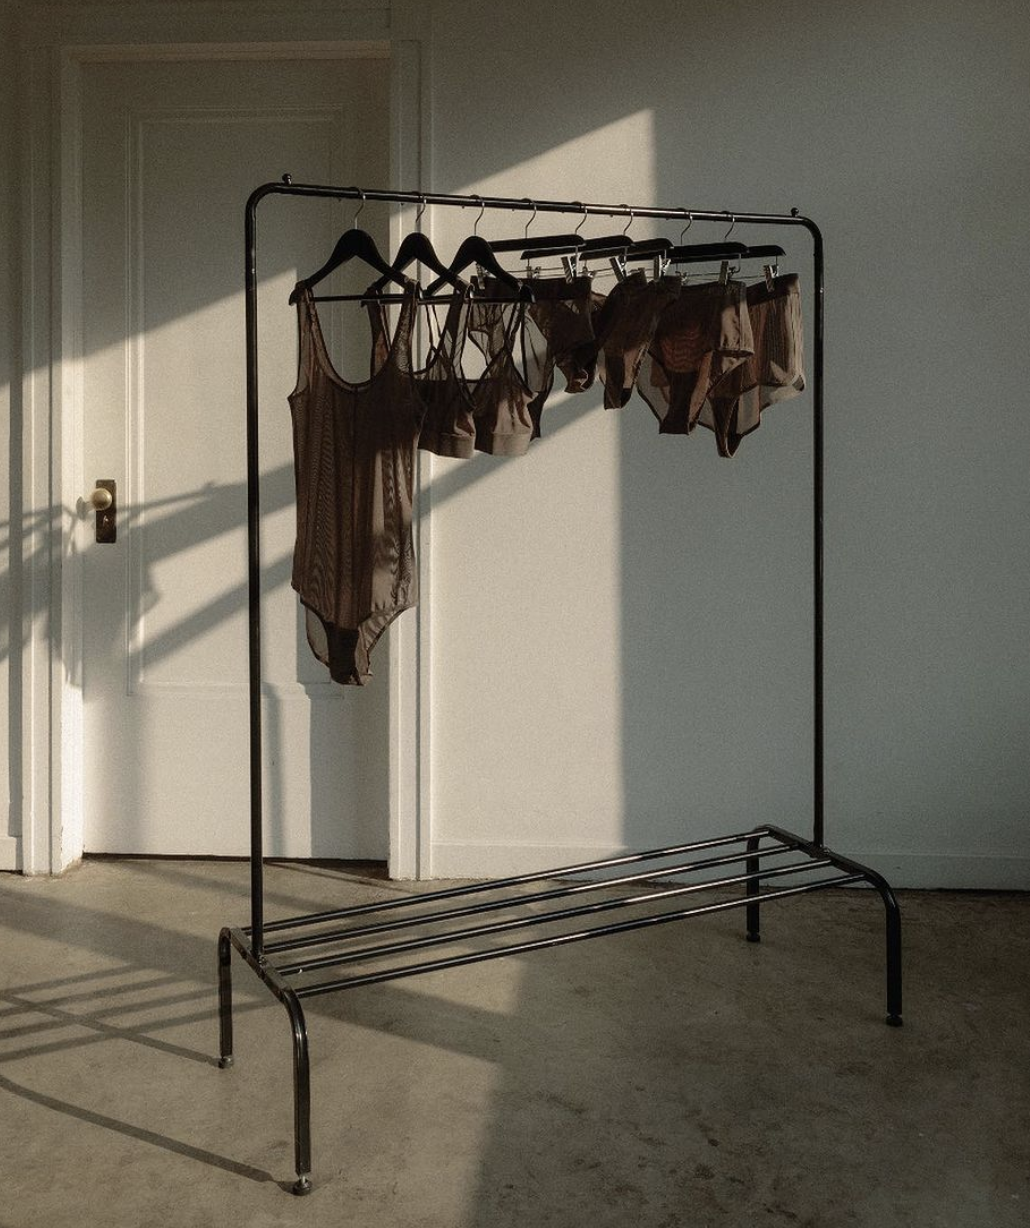 Clothing rack with delicate, chocolate brown undergarments hanging in the sun.